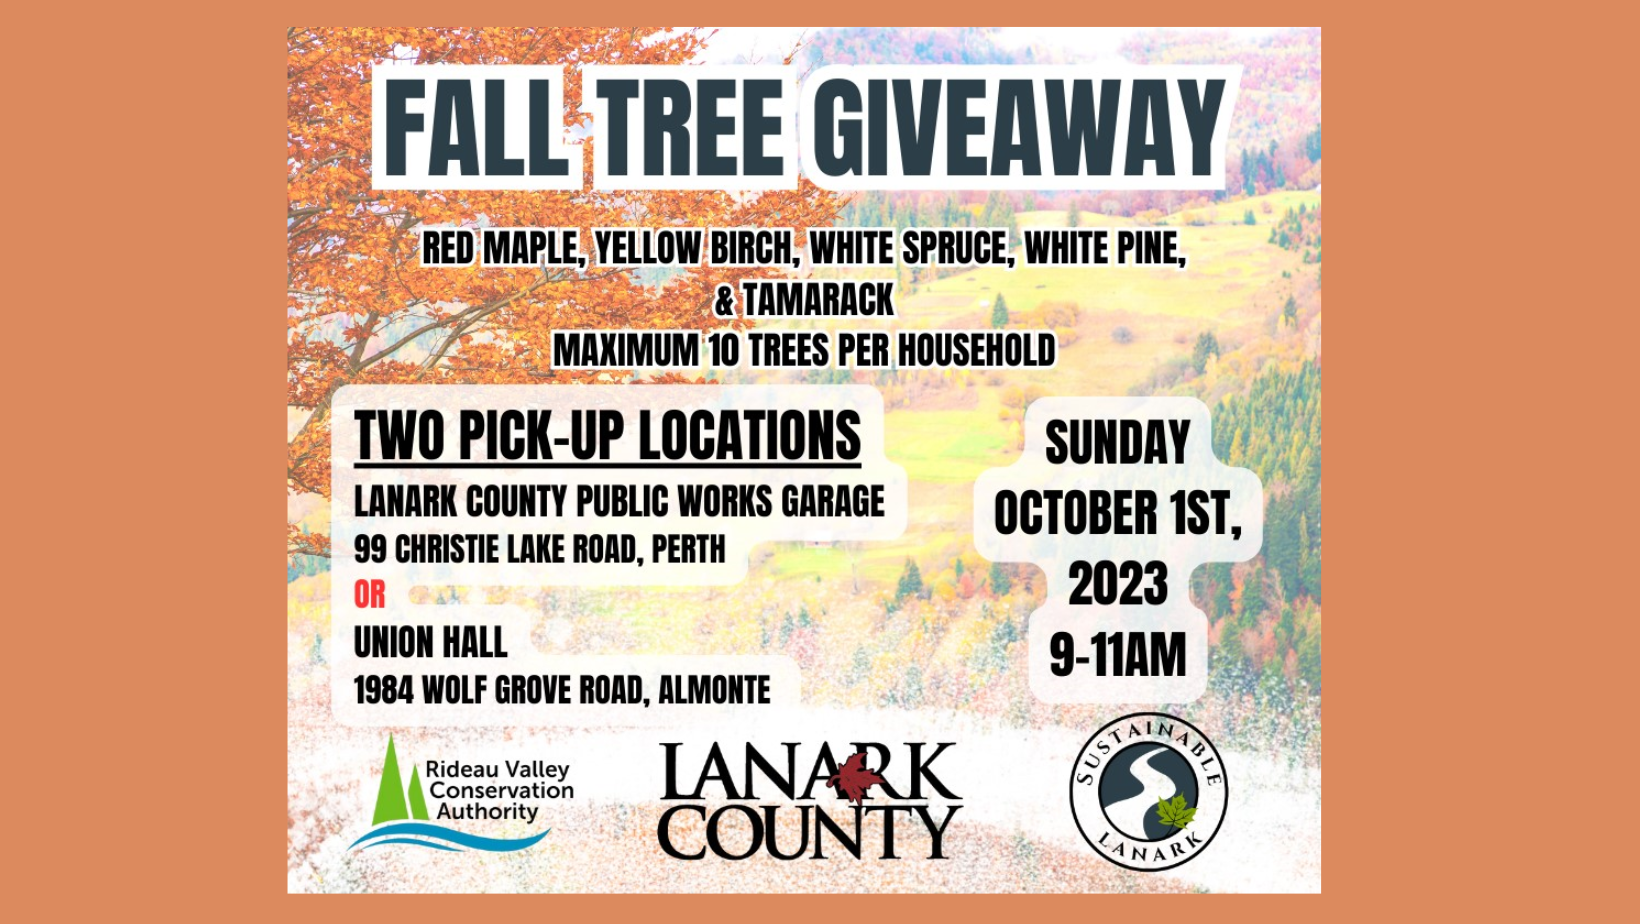 trees, giveaway, poster, dates, locations